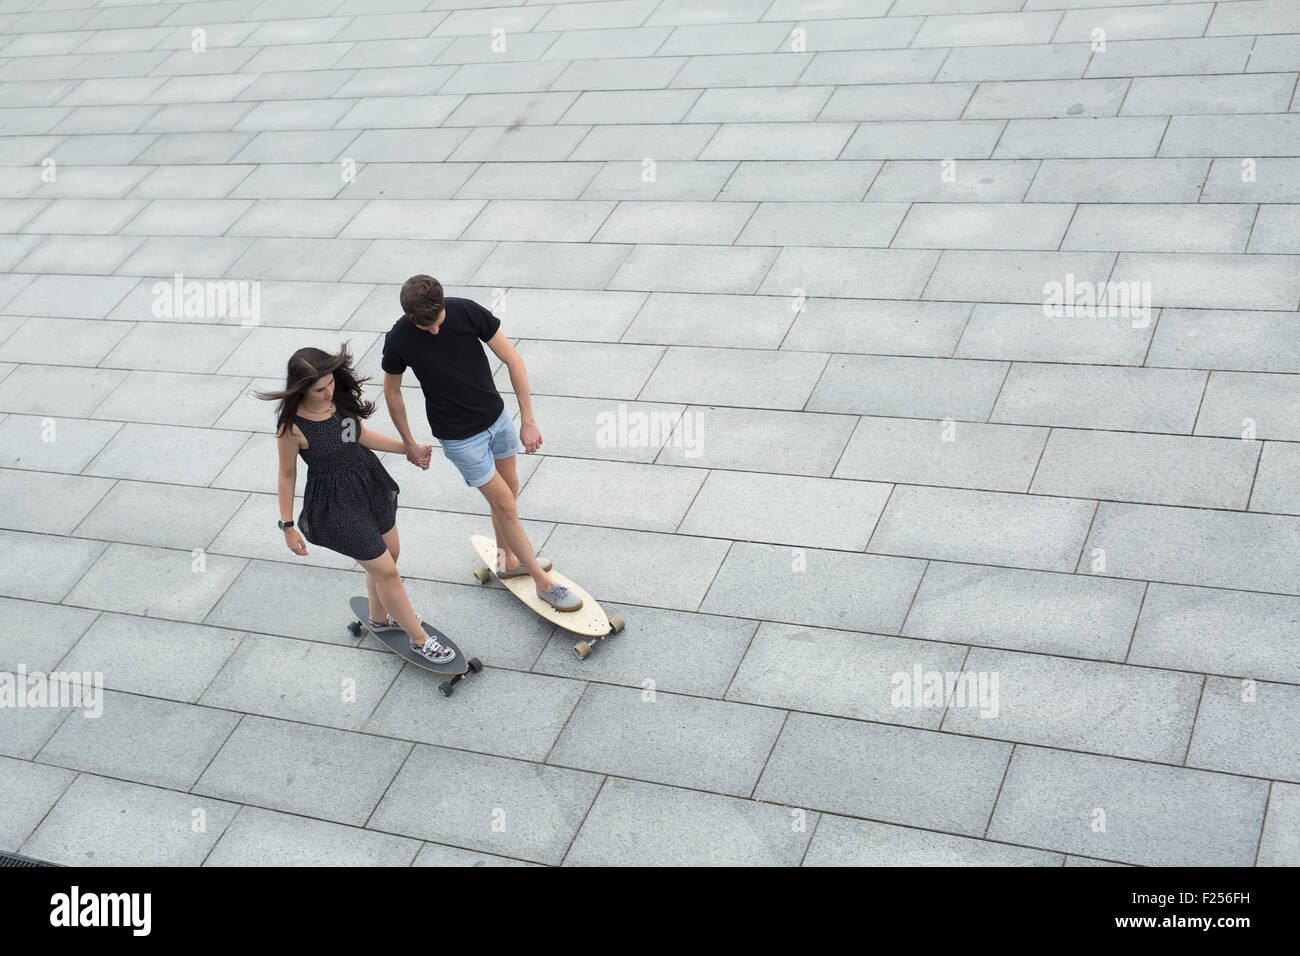 Young pair of stylish teenagers ride longboards Stock Photo